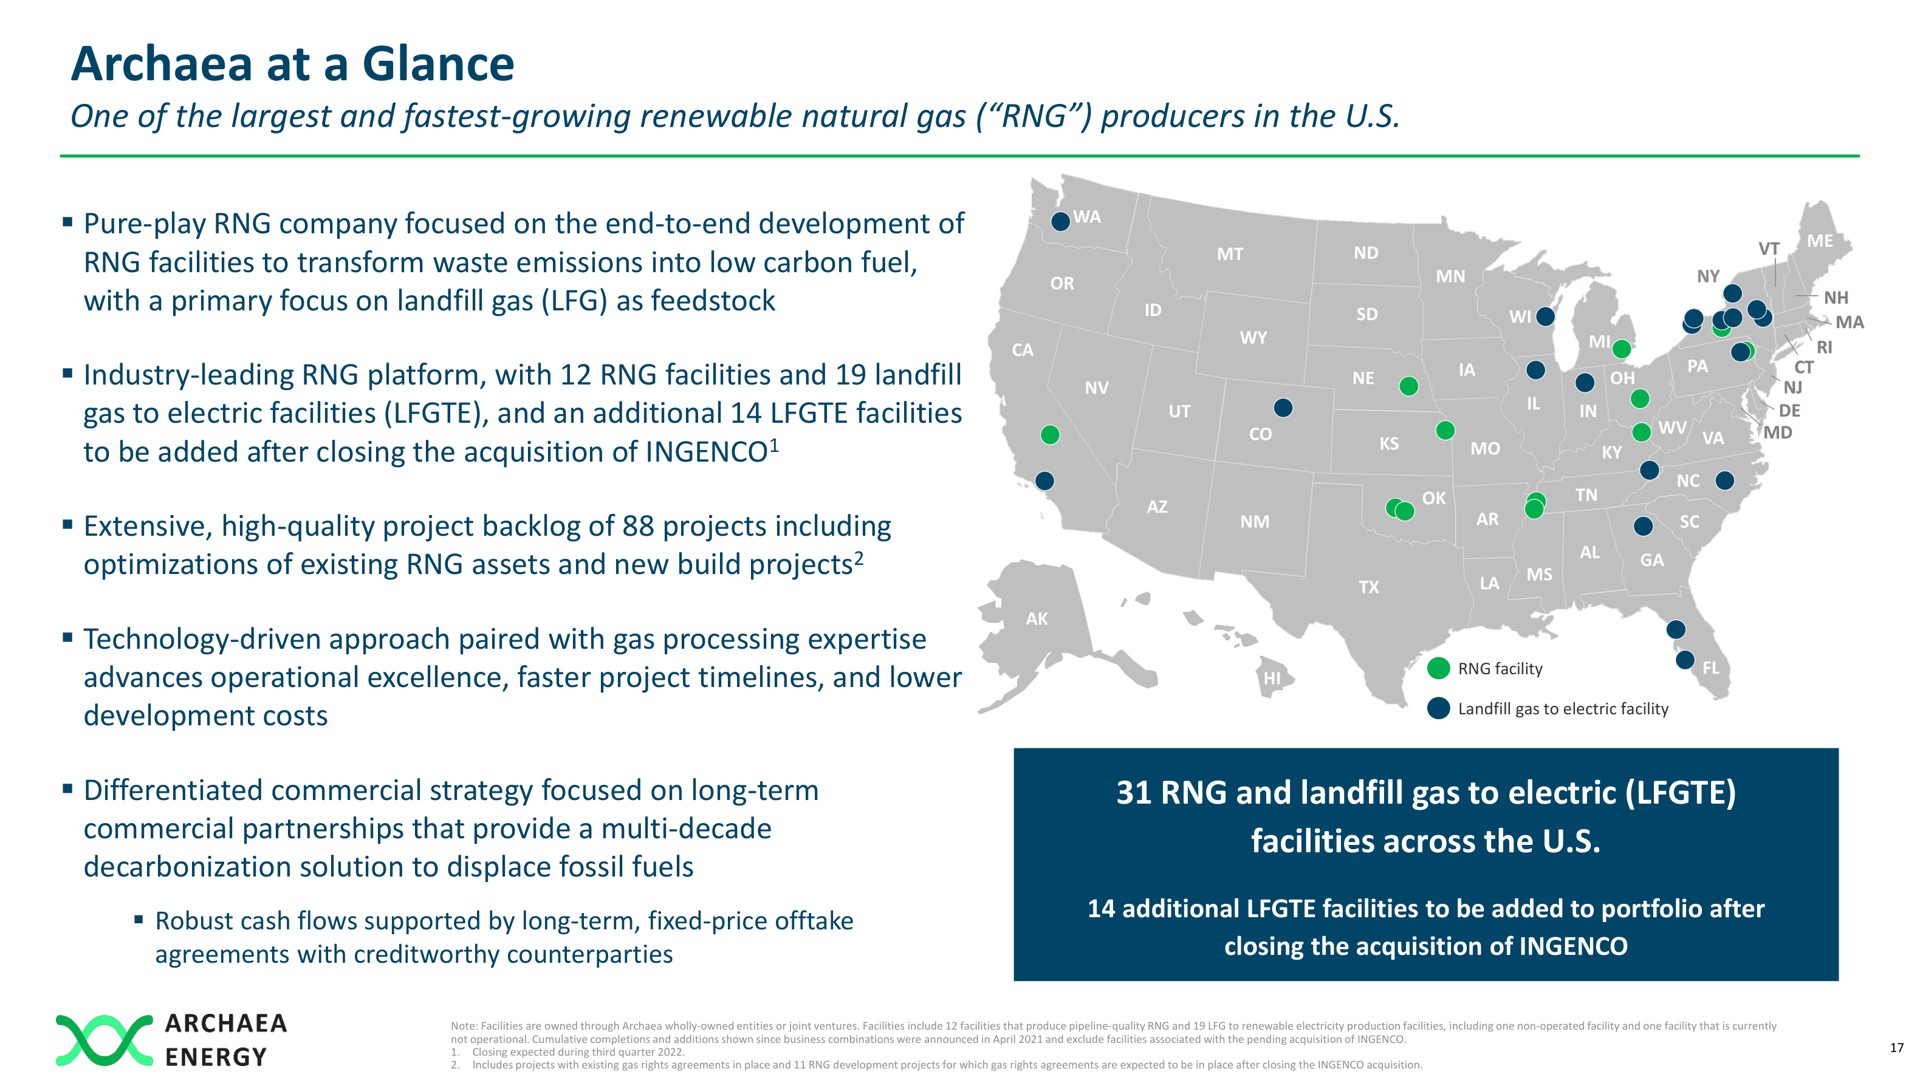 at a glance energy seen opener oes near tenet neon i | Archaea Energy